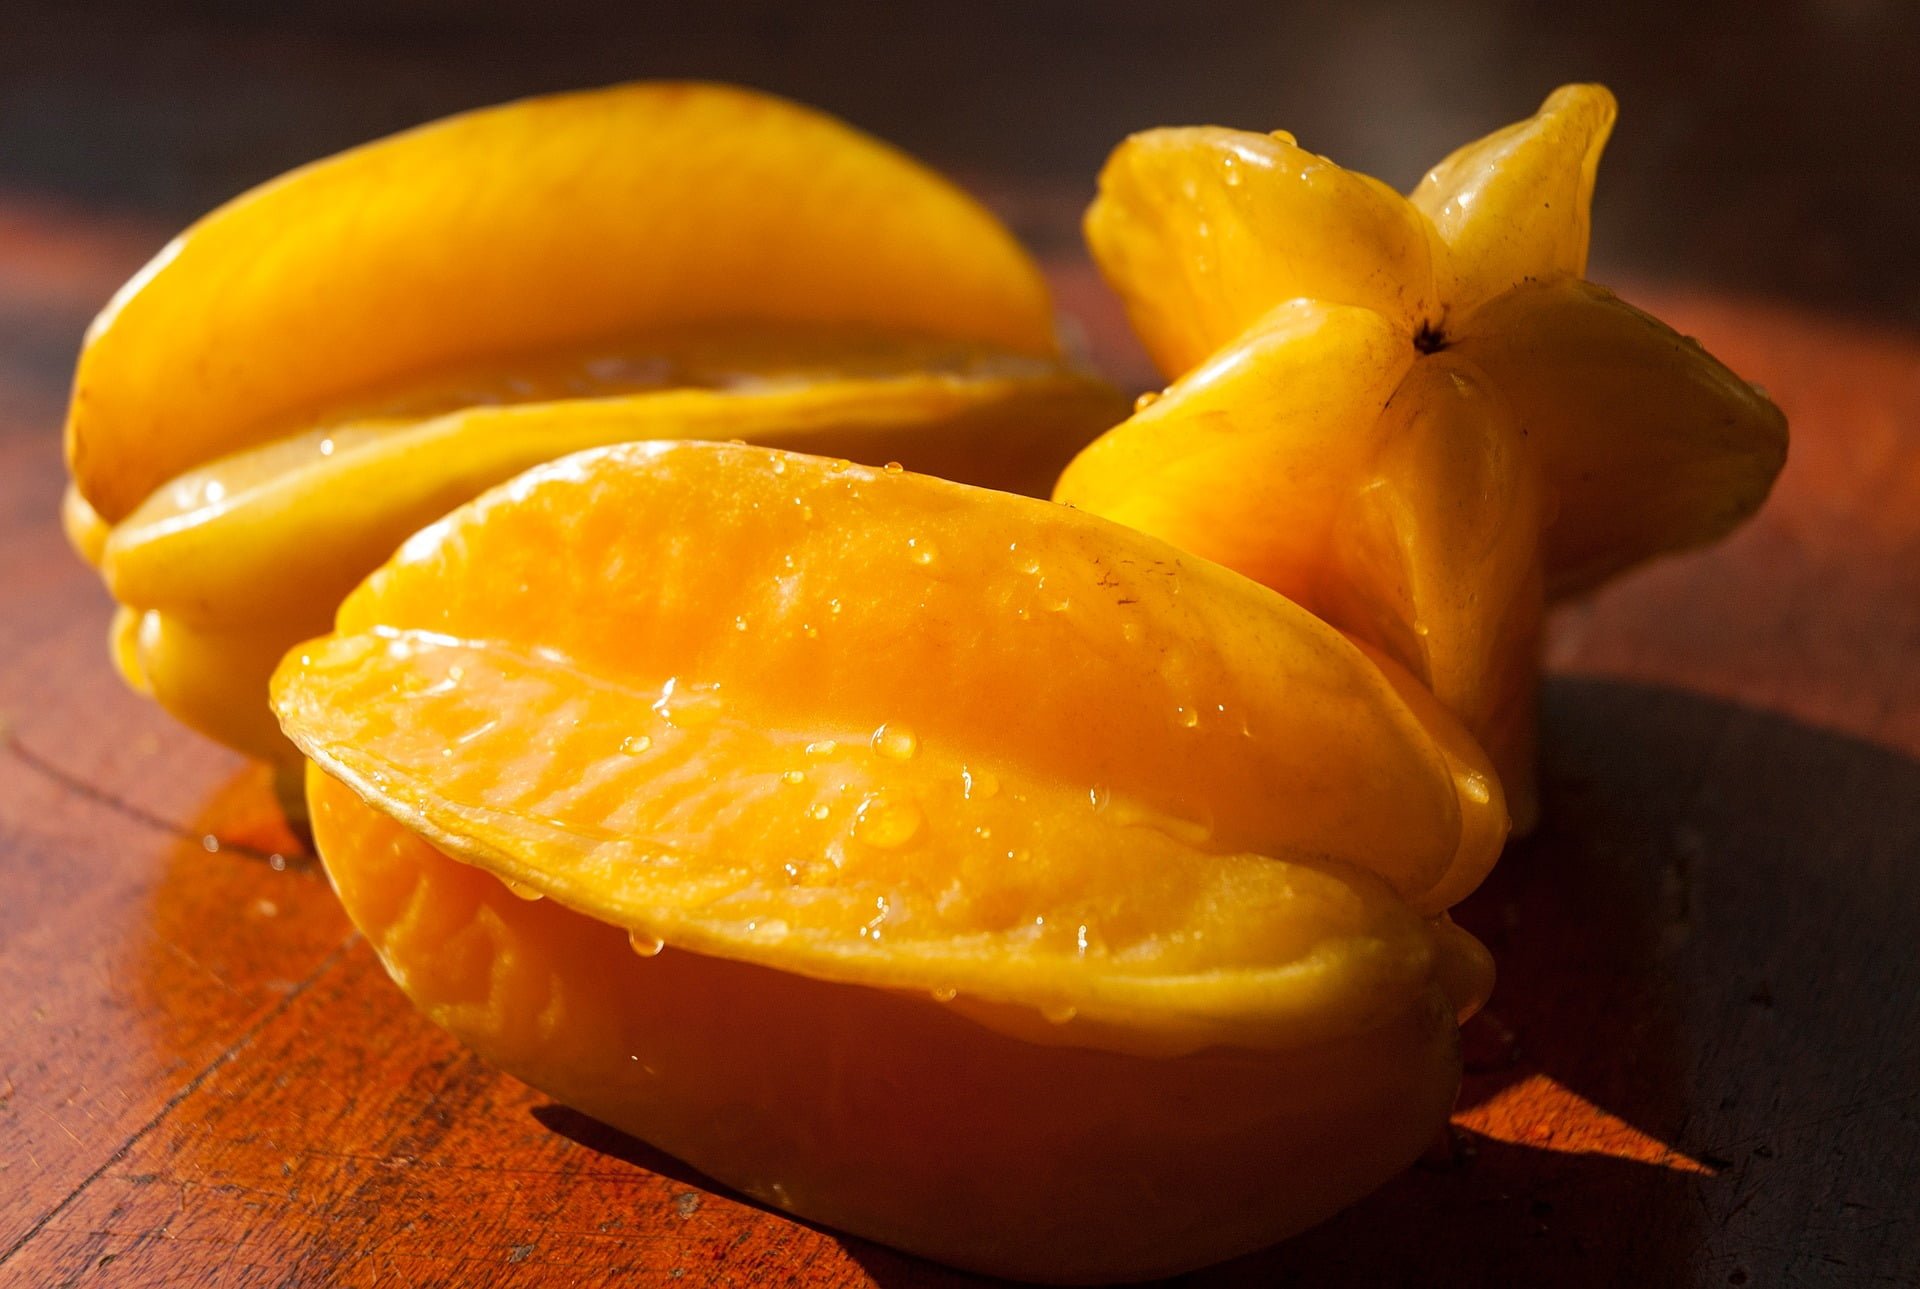 How to Store Star Fruit?